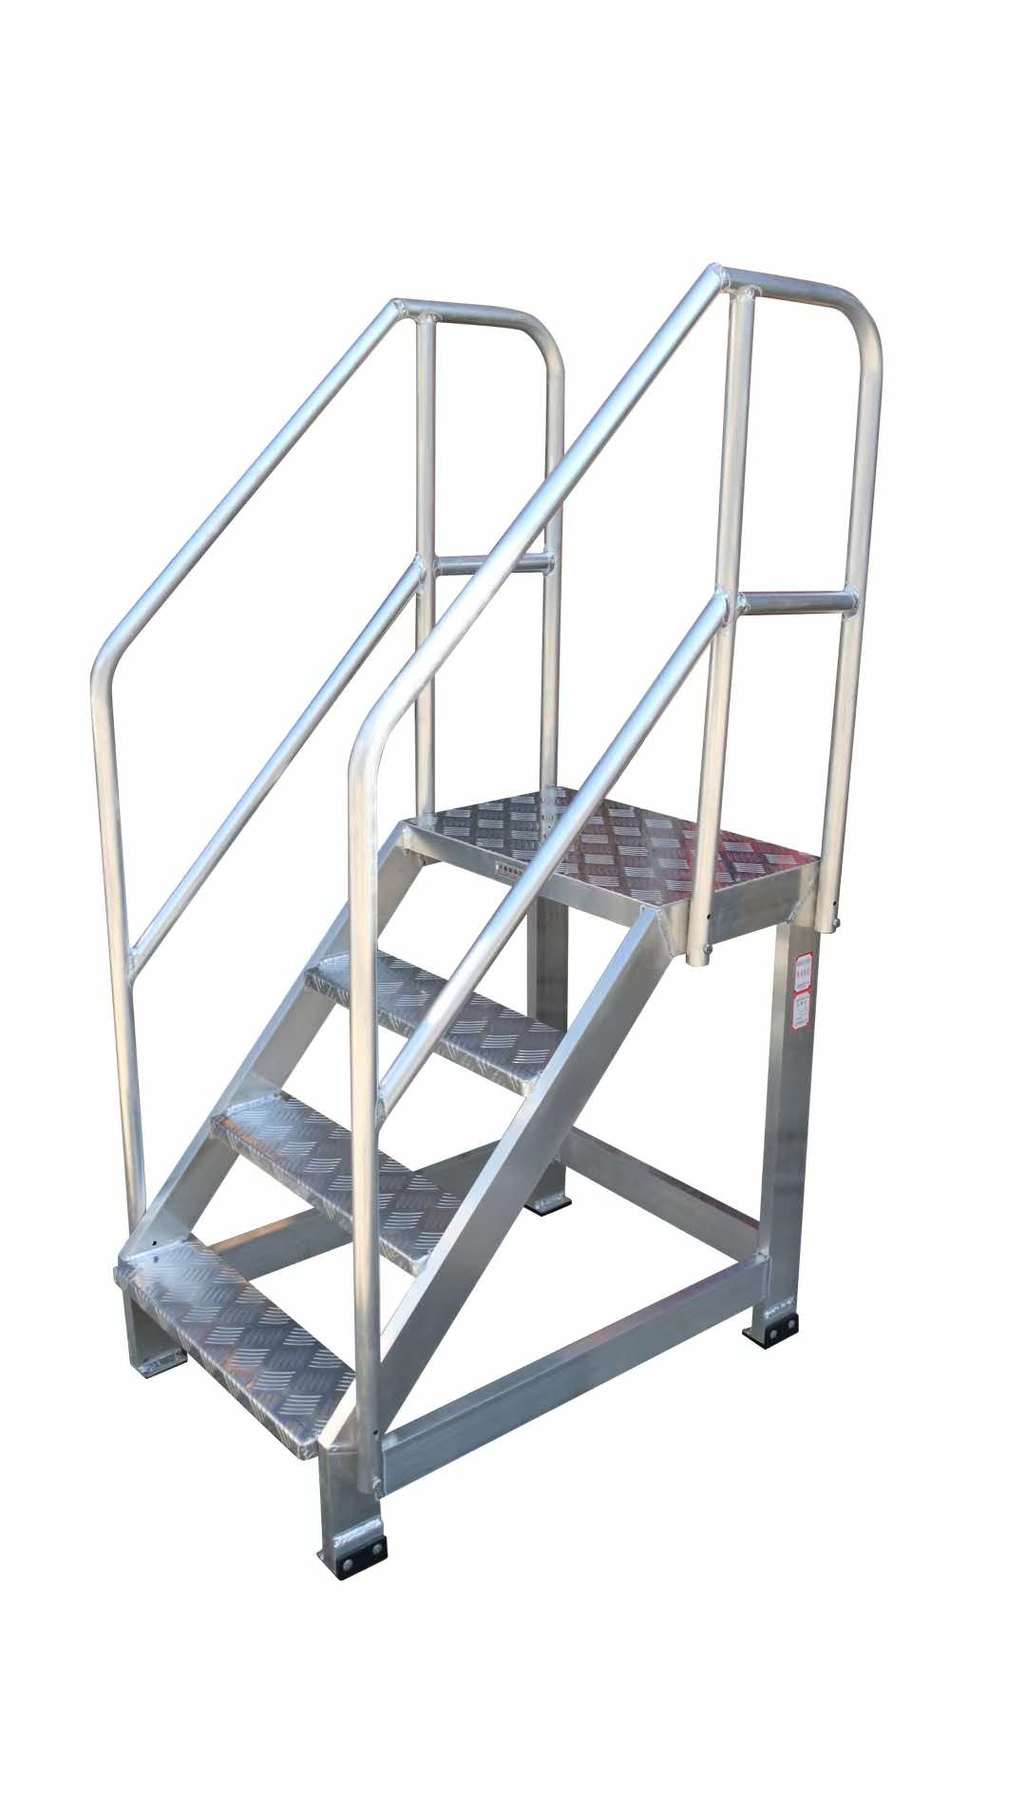 ﻿Mobile platform ladders that can be customized according to requirements